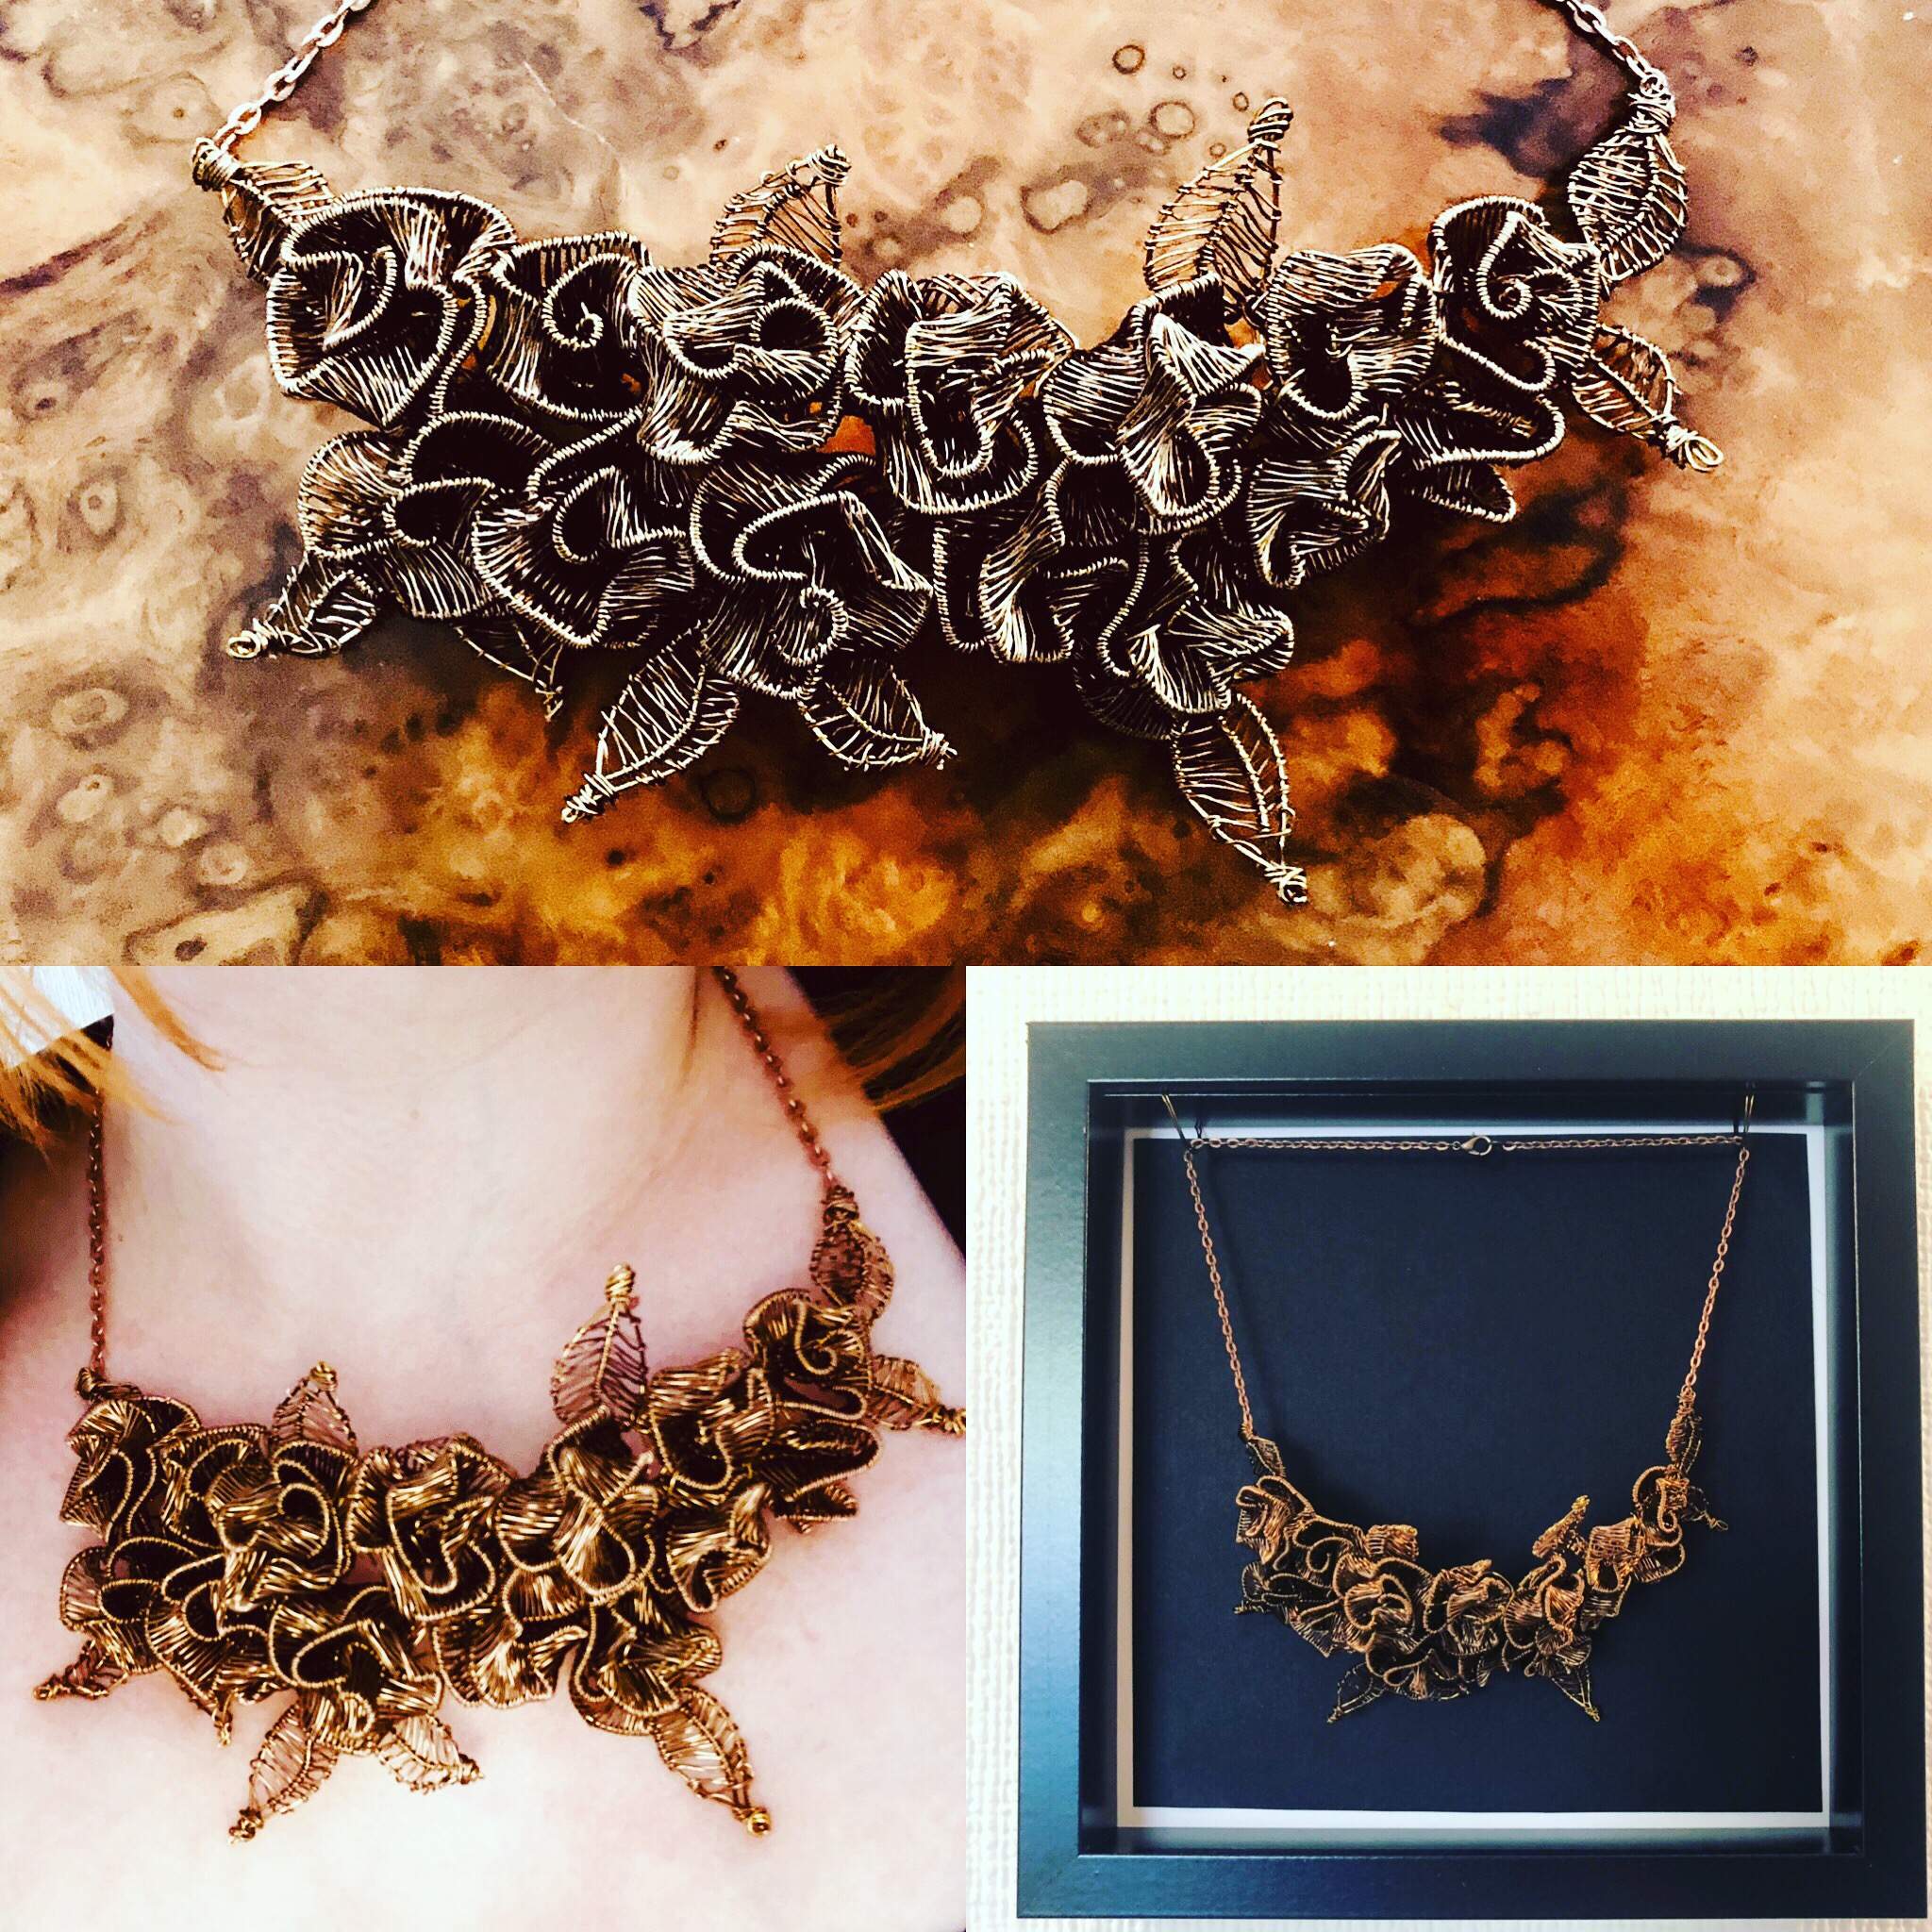 Wearable Art Necklace made from Antique Bronze wire wrapped roses with leaves - hung in a frame when not being worn